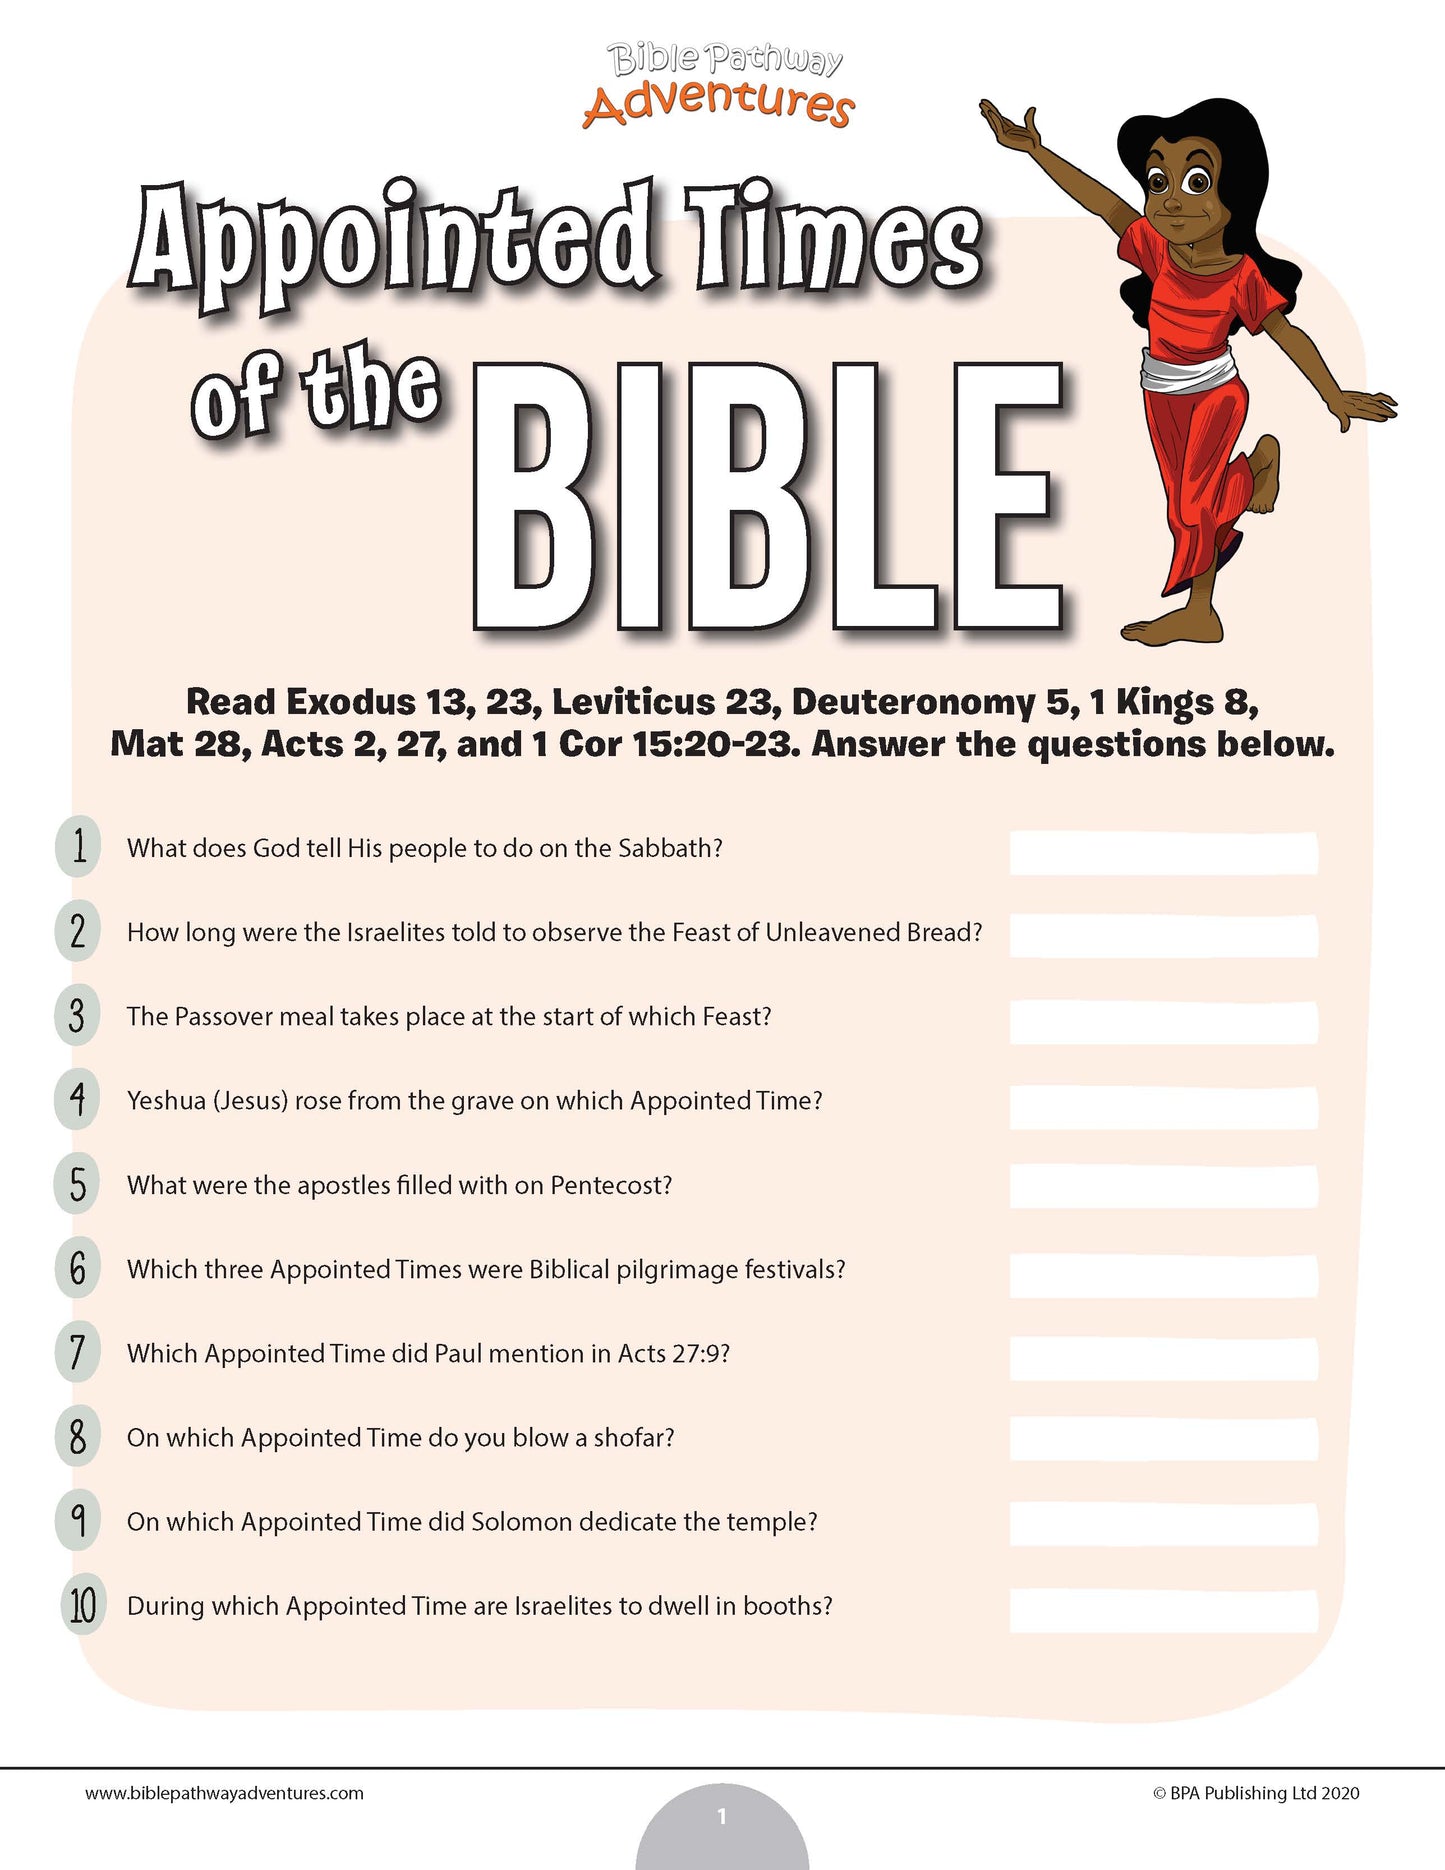 Appointed Times of the Bible quiz